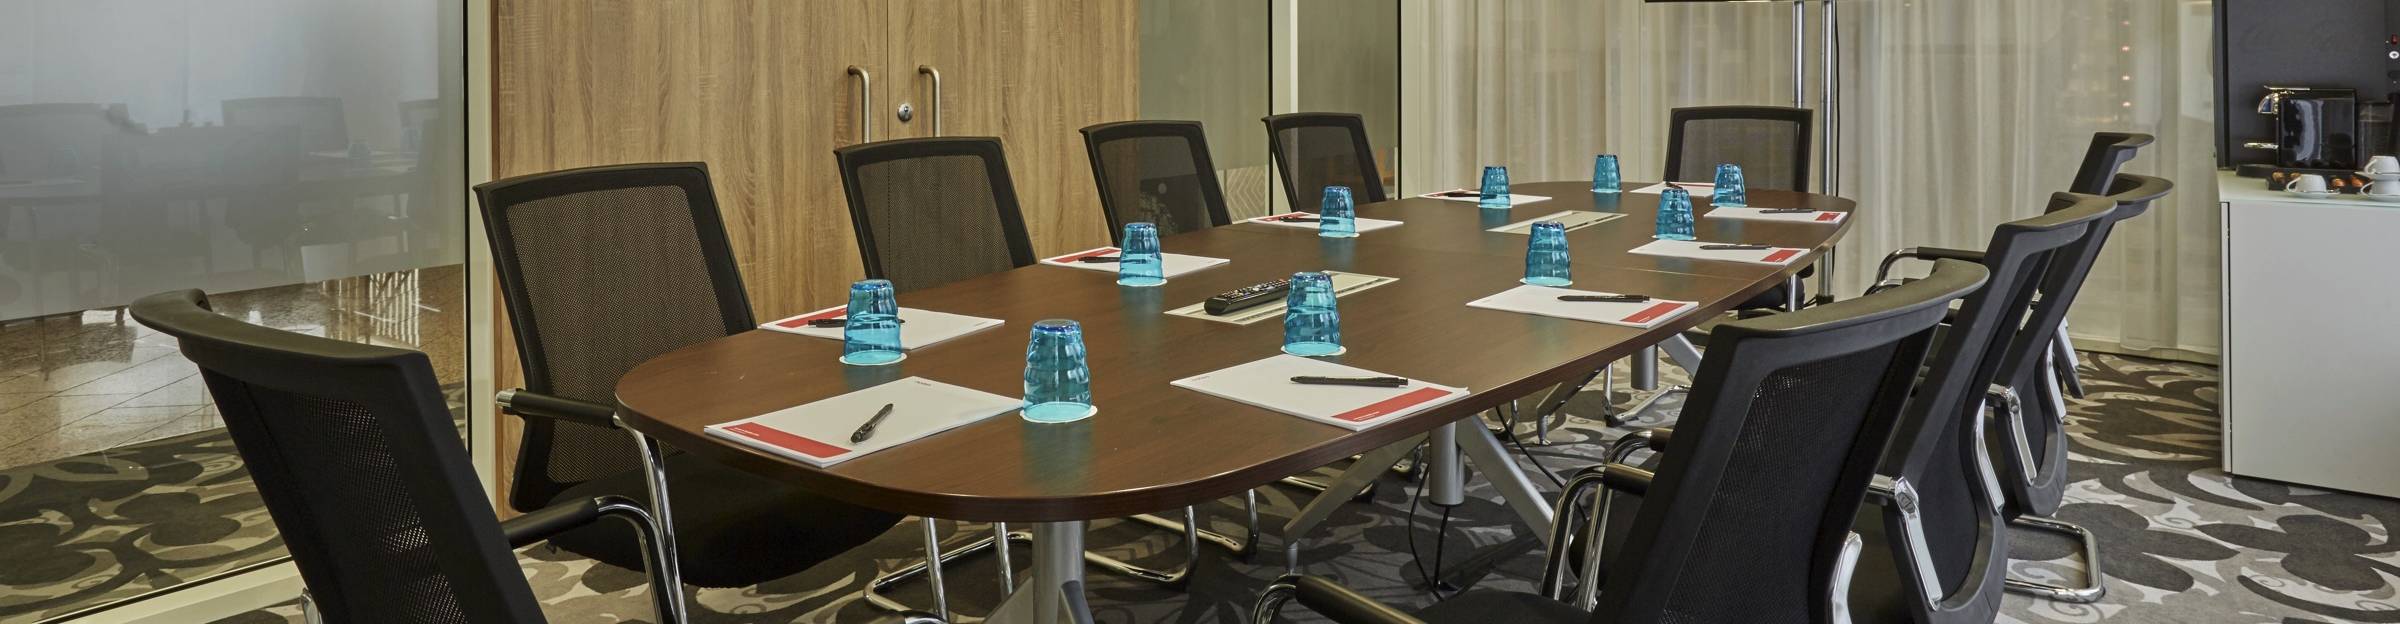 Conferencing package ‘Comfort’ - Meetings at H-Hotels.com